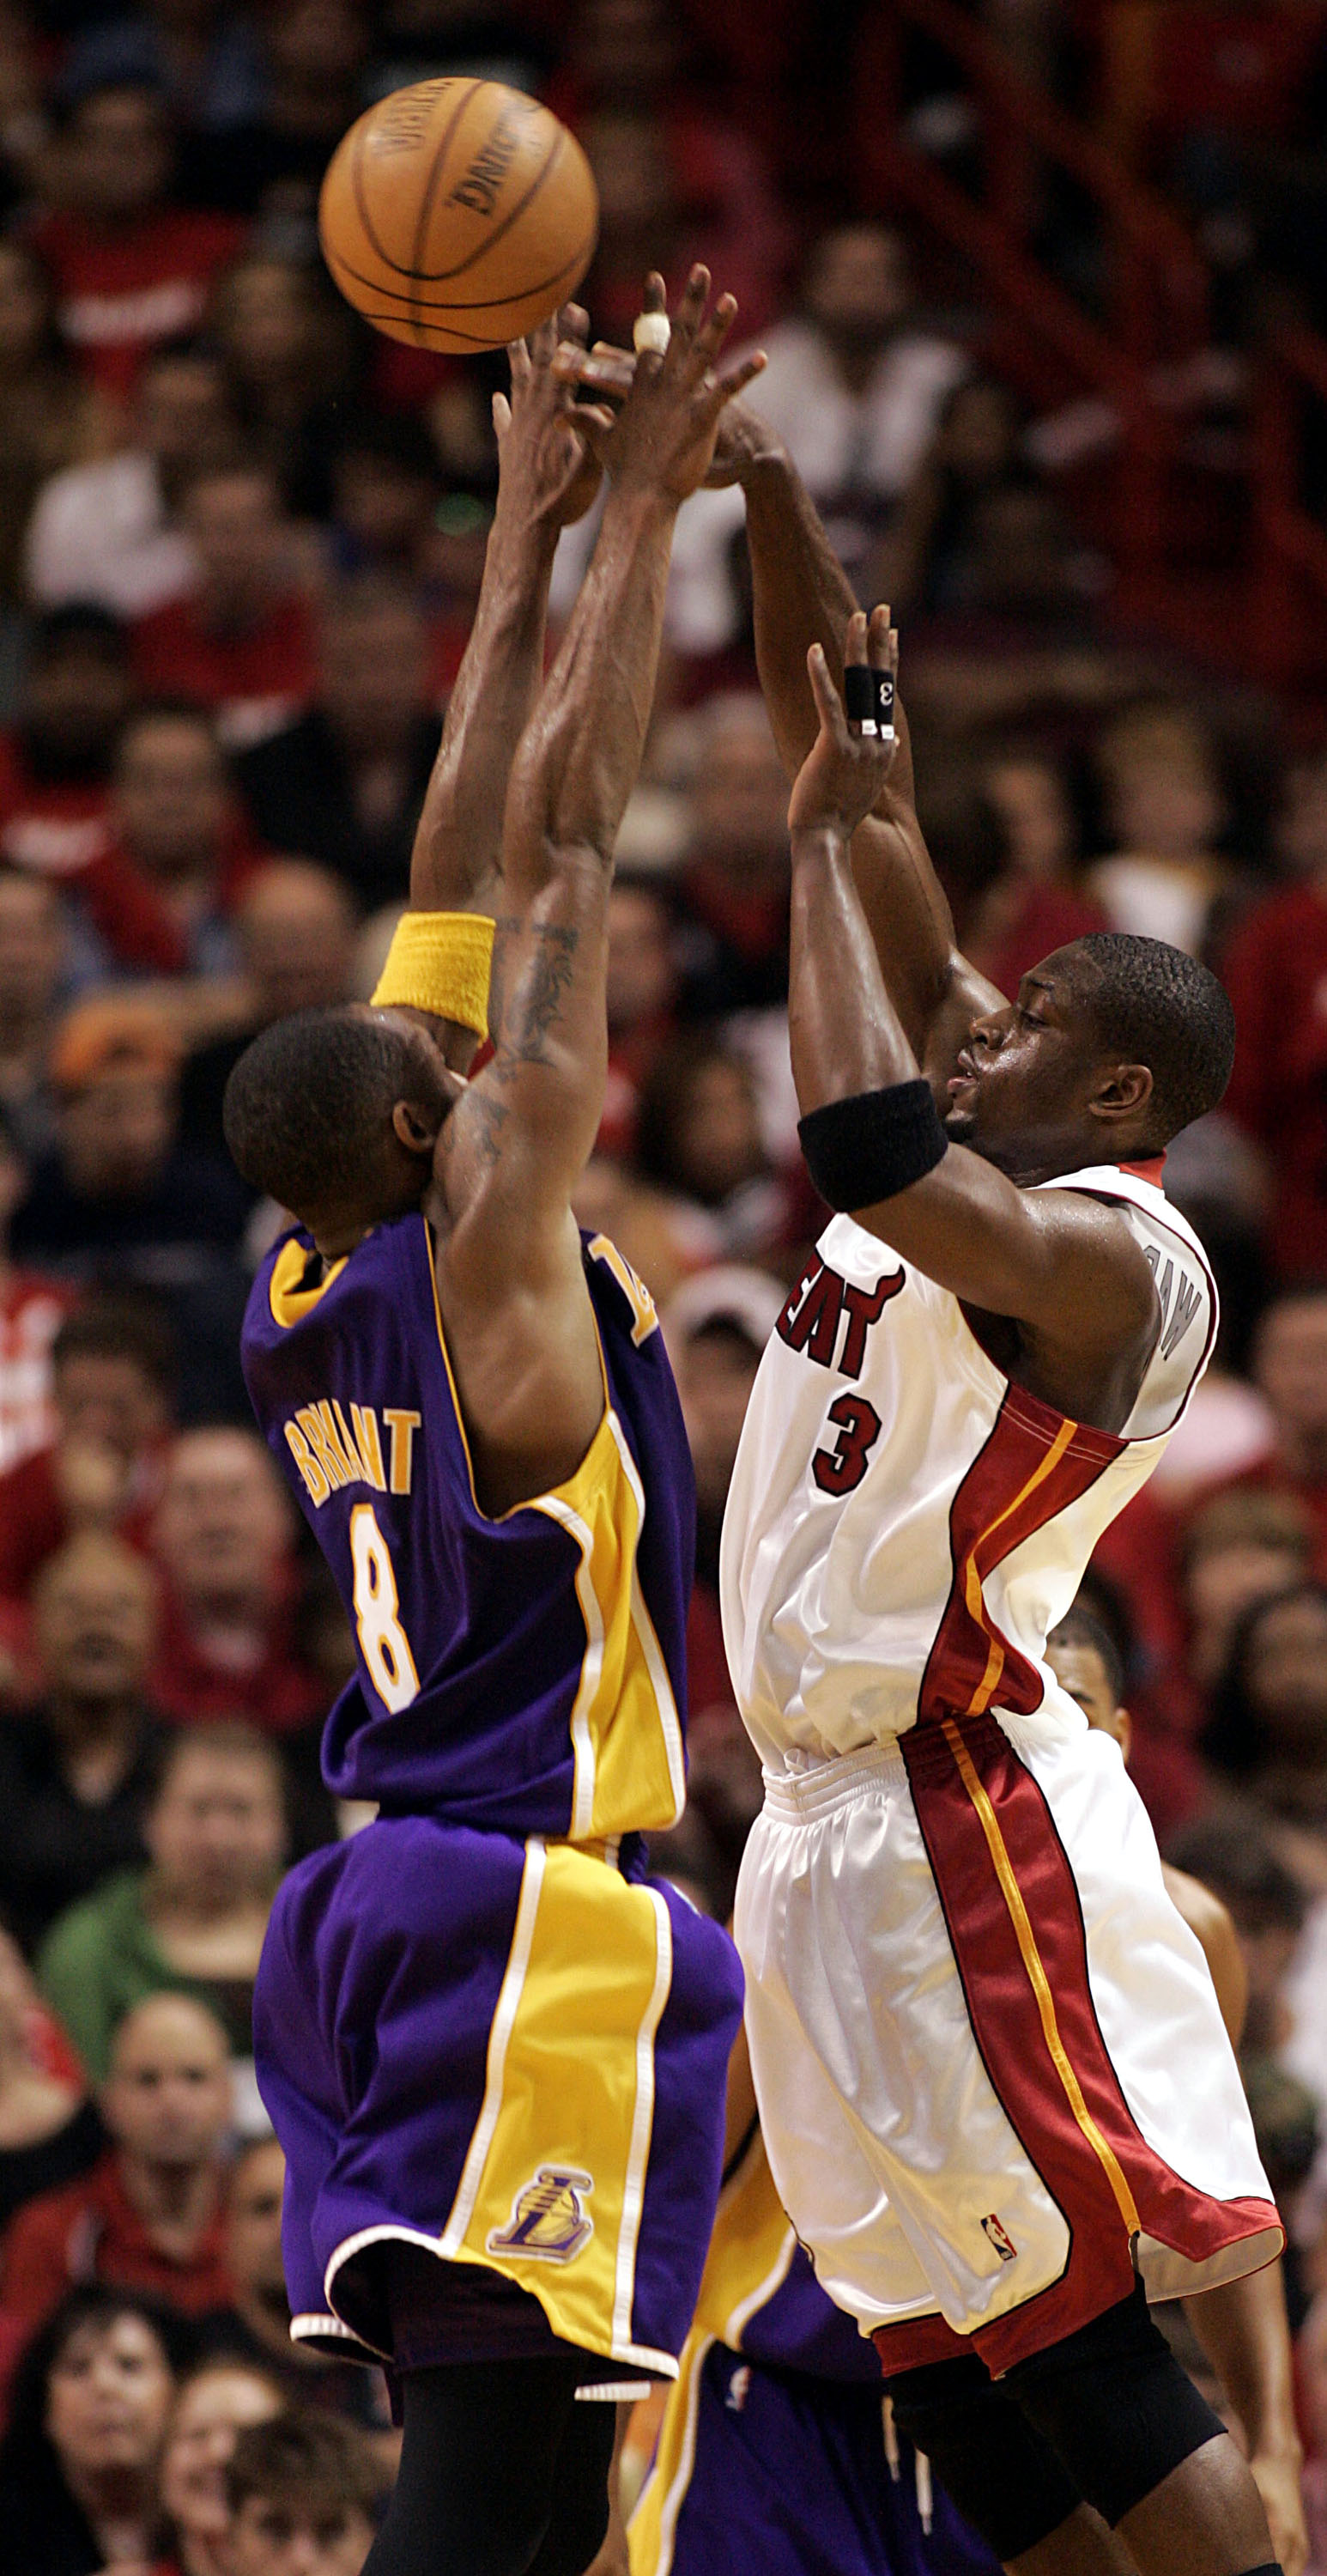 MIAMI - DECEMBER 25:  Dwyane Wade #3 of the Miami Heat shoots against Kobe Bryant #8 of the Los Angeles Lakers on December 25, 2005 at the American Airlines Arena in Miami, Florida. The Heat defeated the Lakers 97-92.  NOTE TO USER: User expressly acknowl